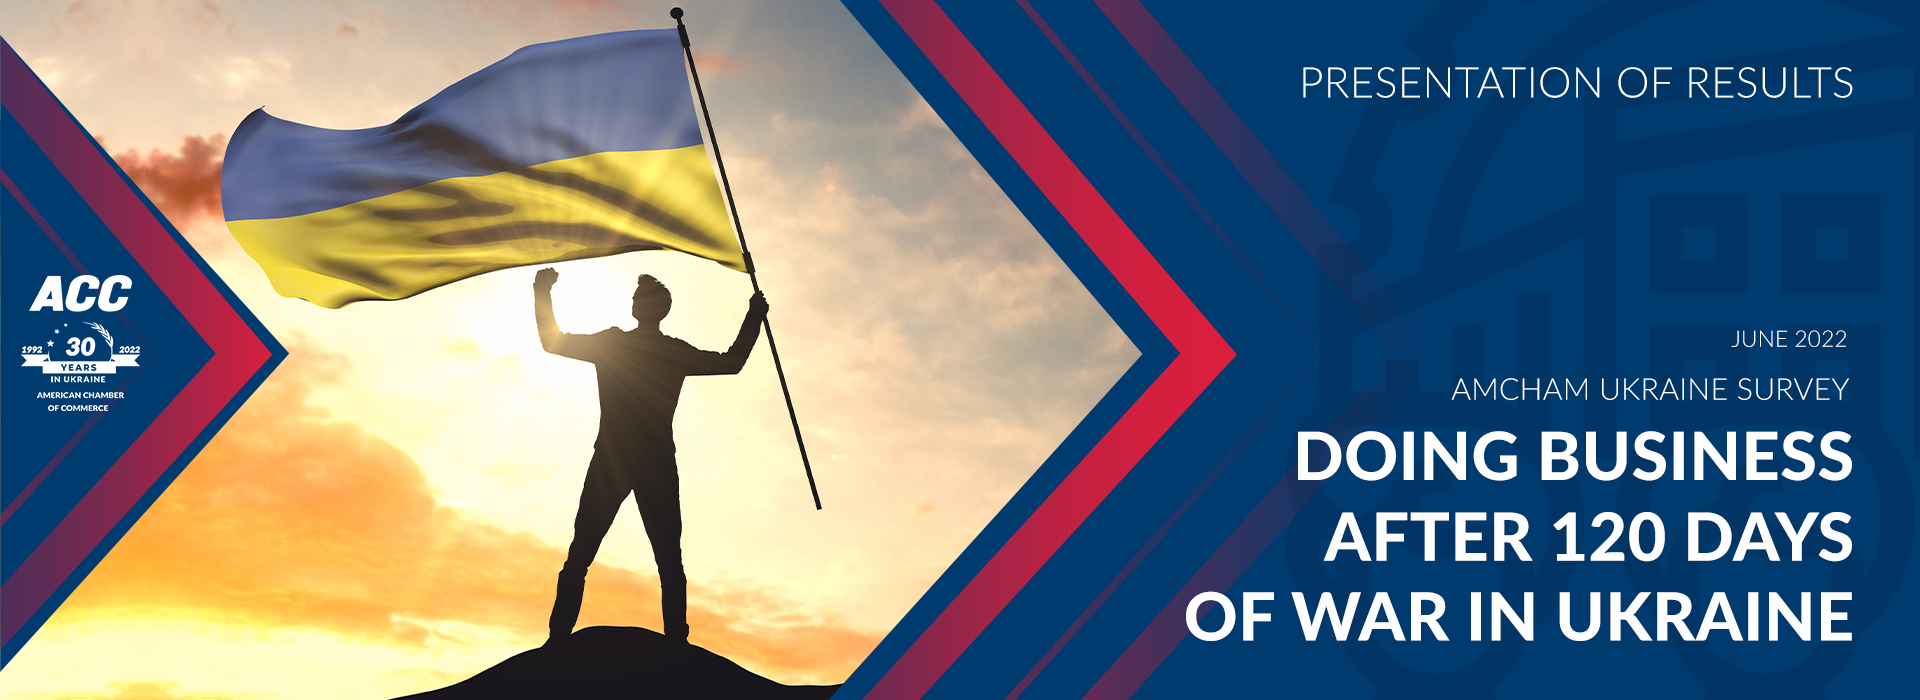 Results of the AmCham Survey on Doing Business after 120 Days of War in Ukraine